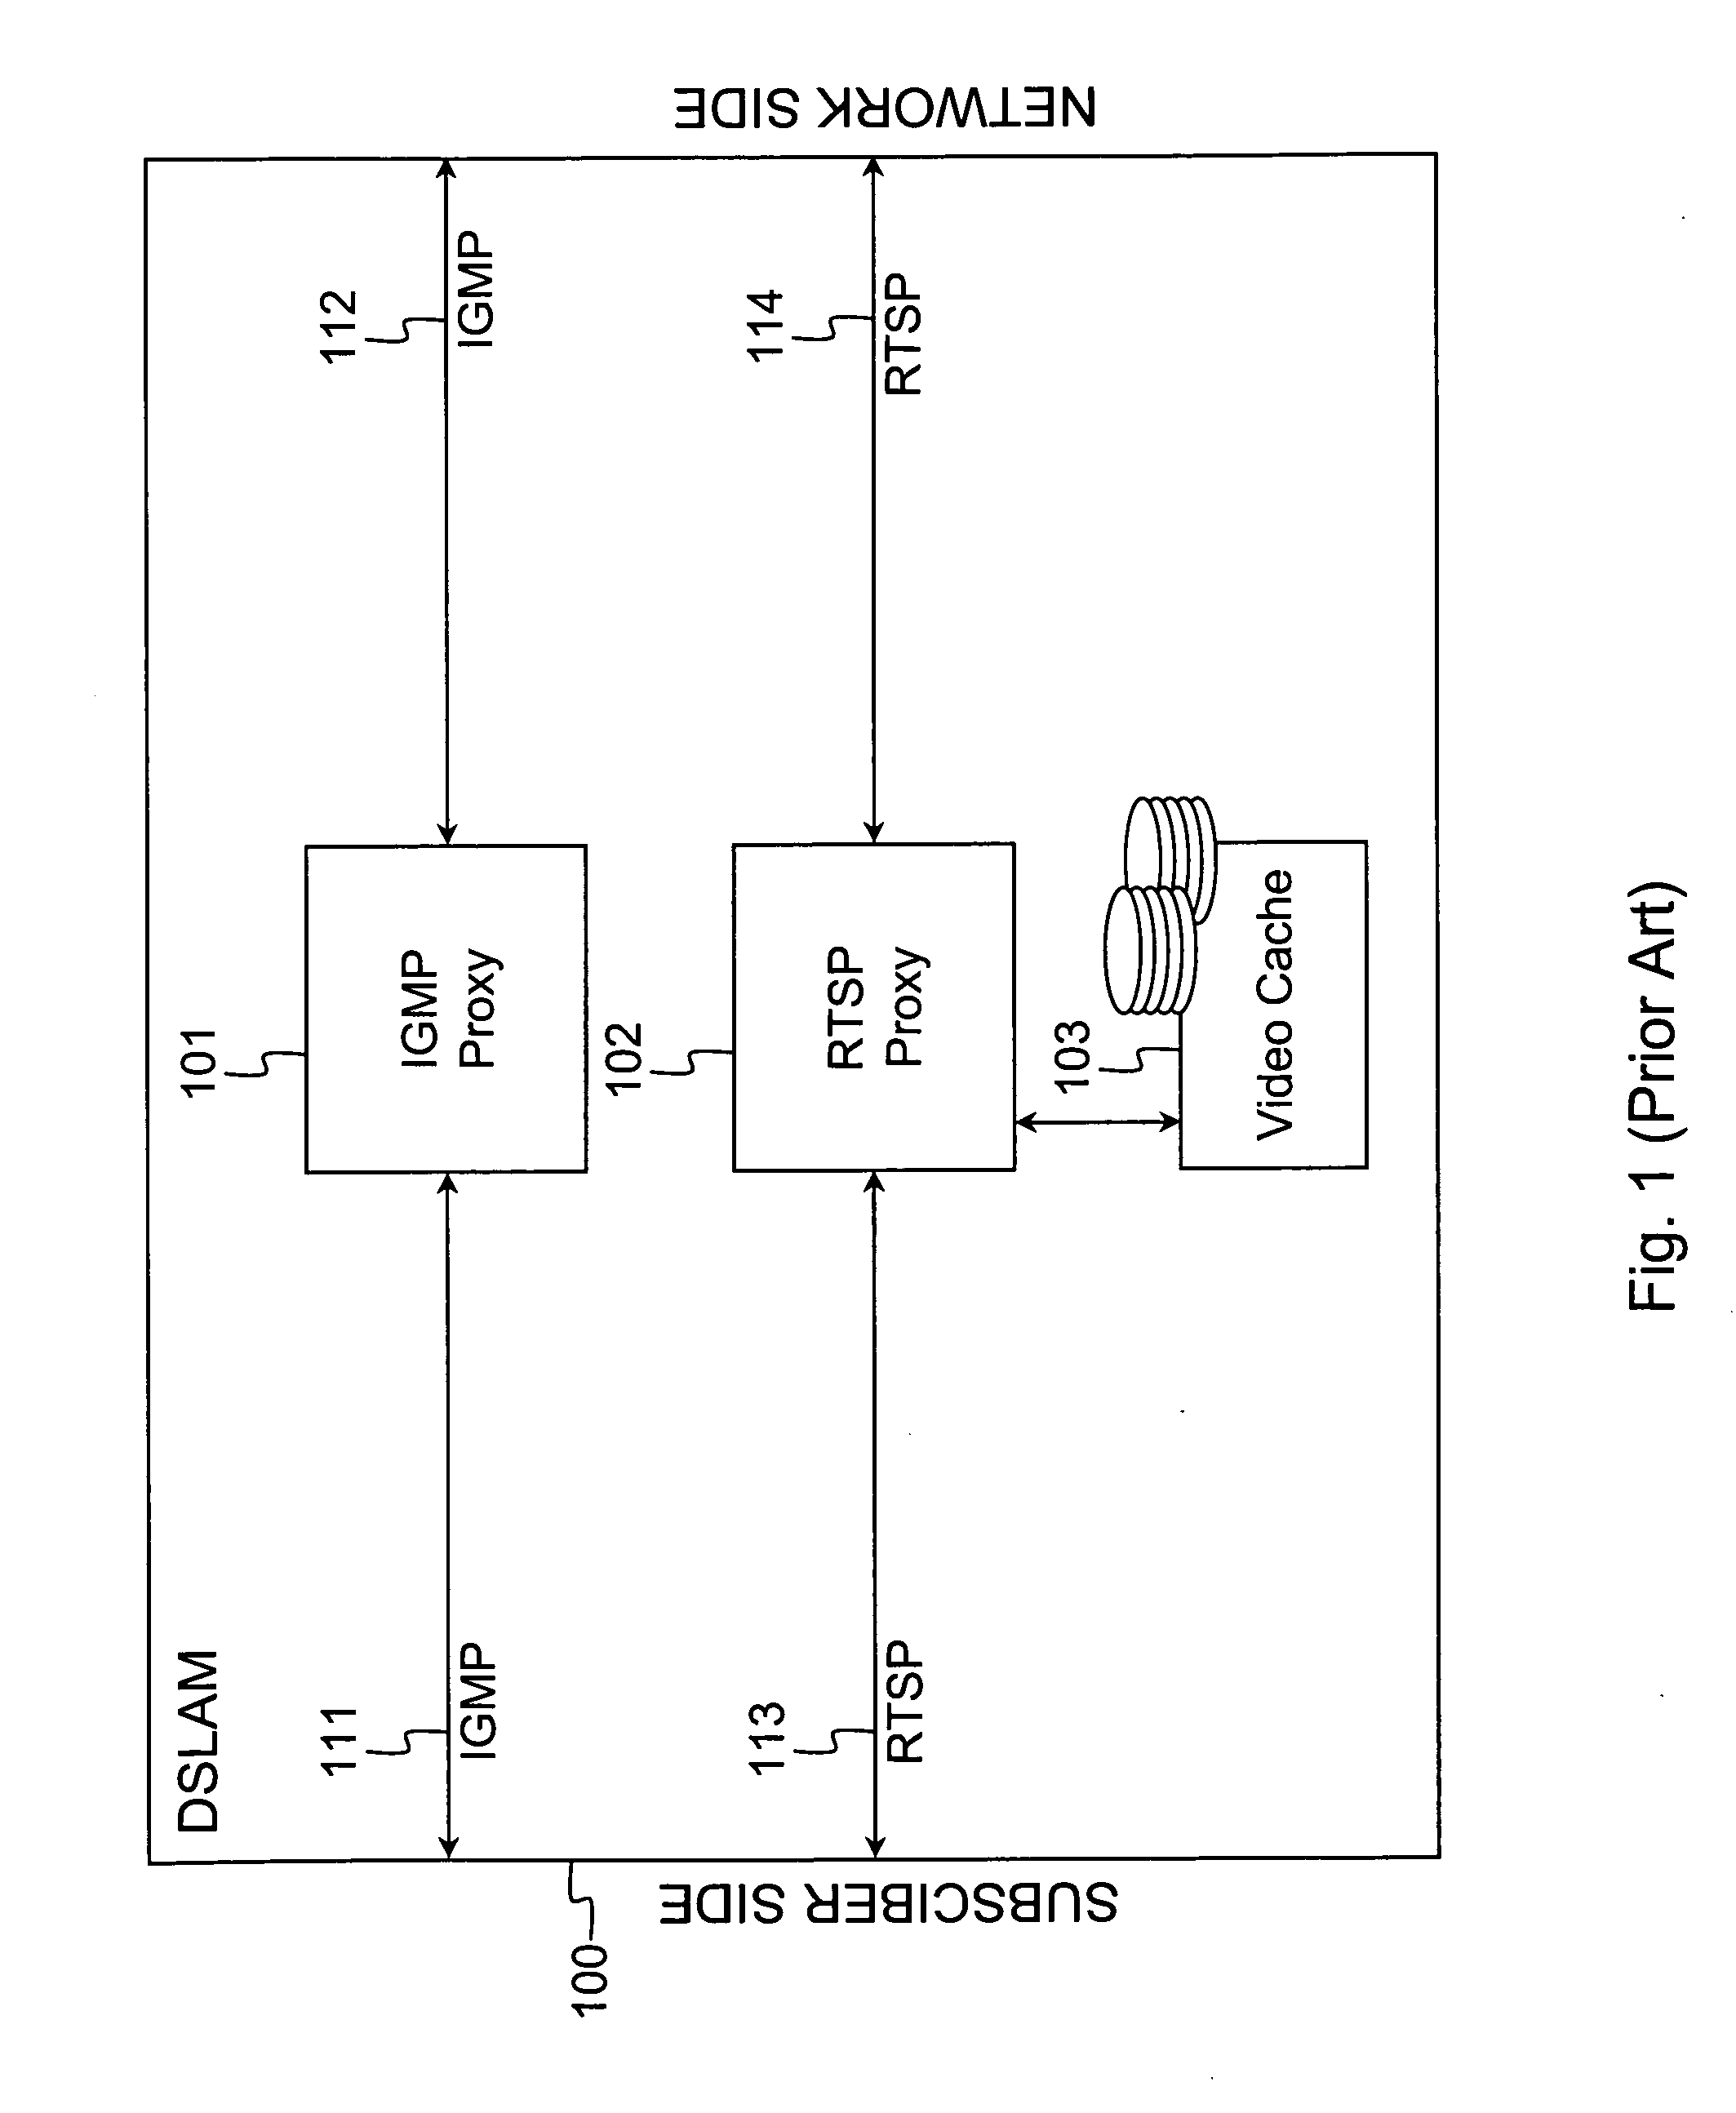 Access/edge node supporting multiple video streaming services using a single request protocol